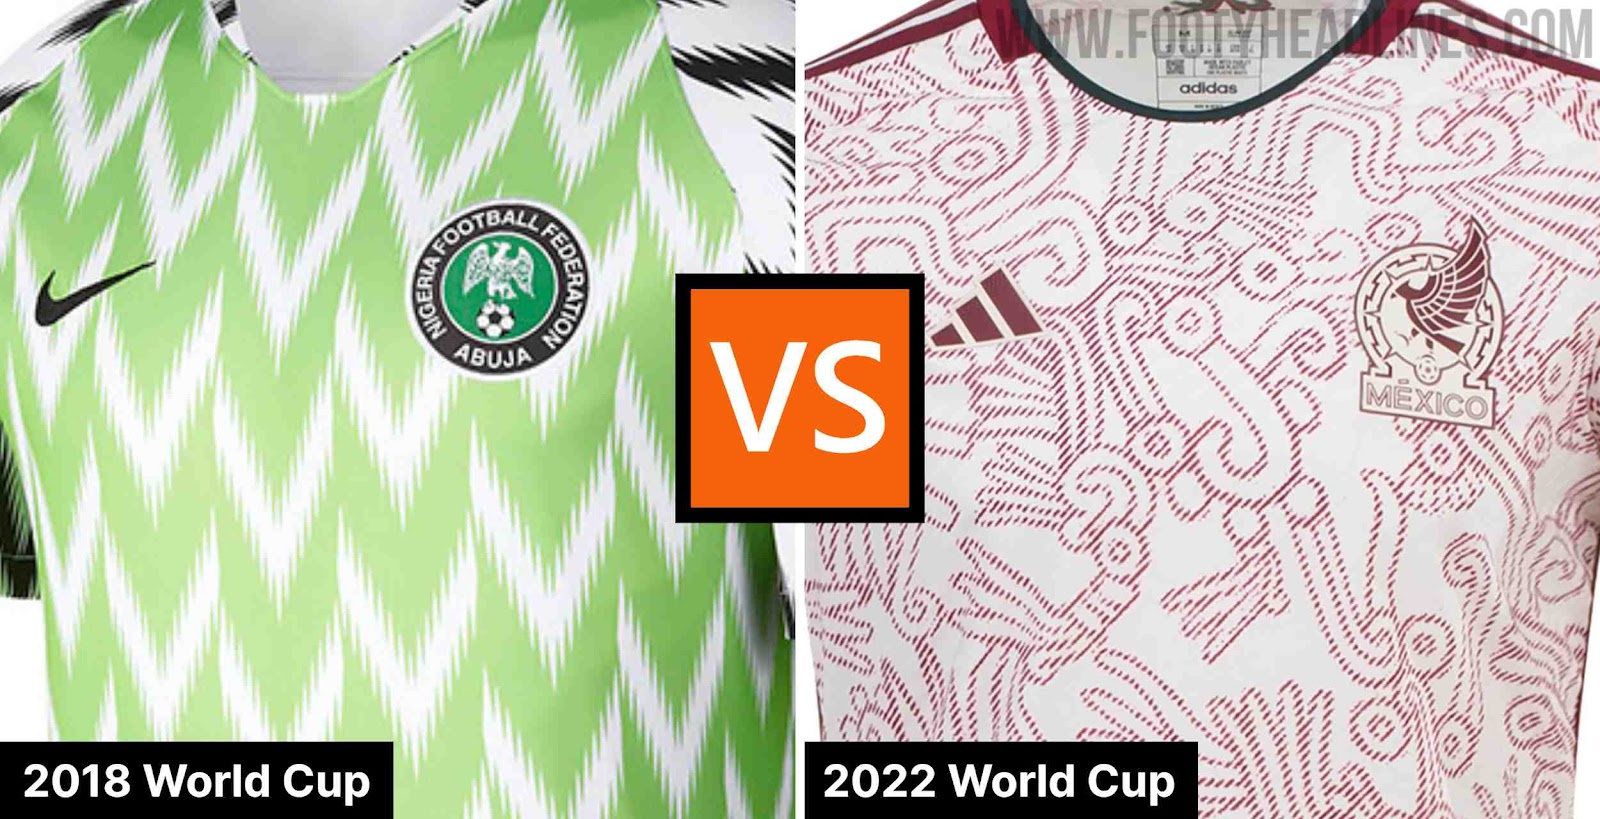 Adidas 2022 World Cup Kit Font Released - Footy Headlines